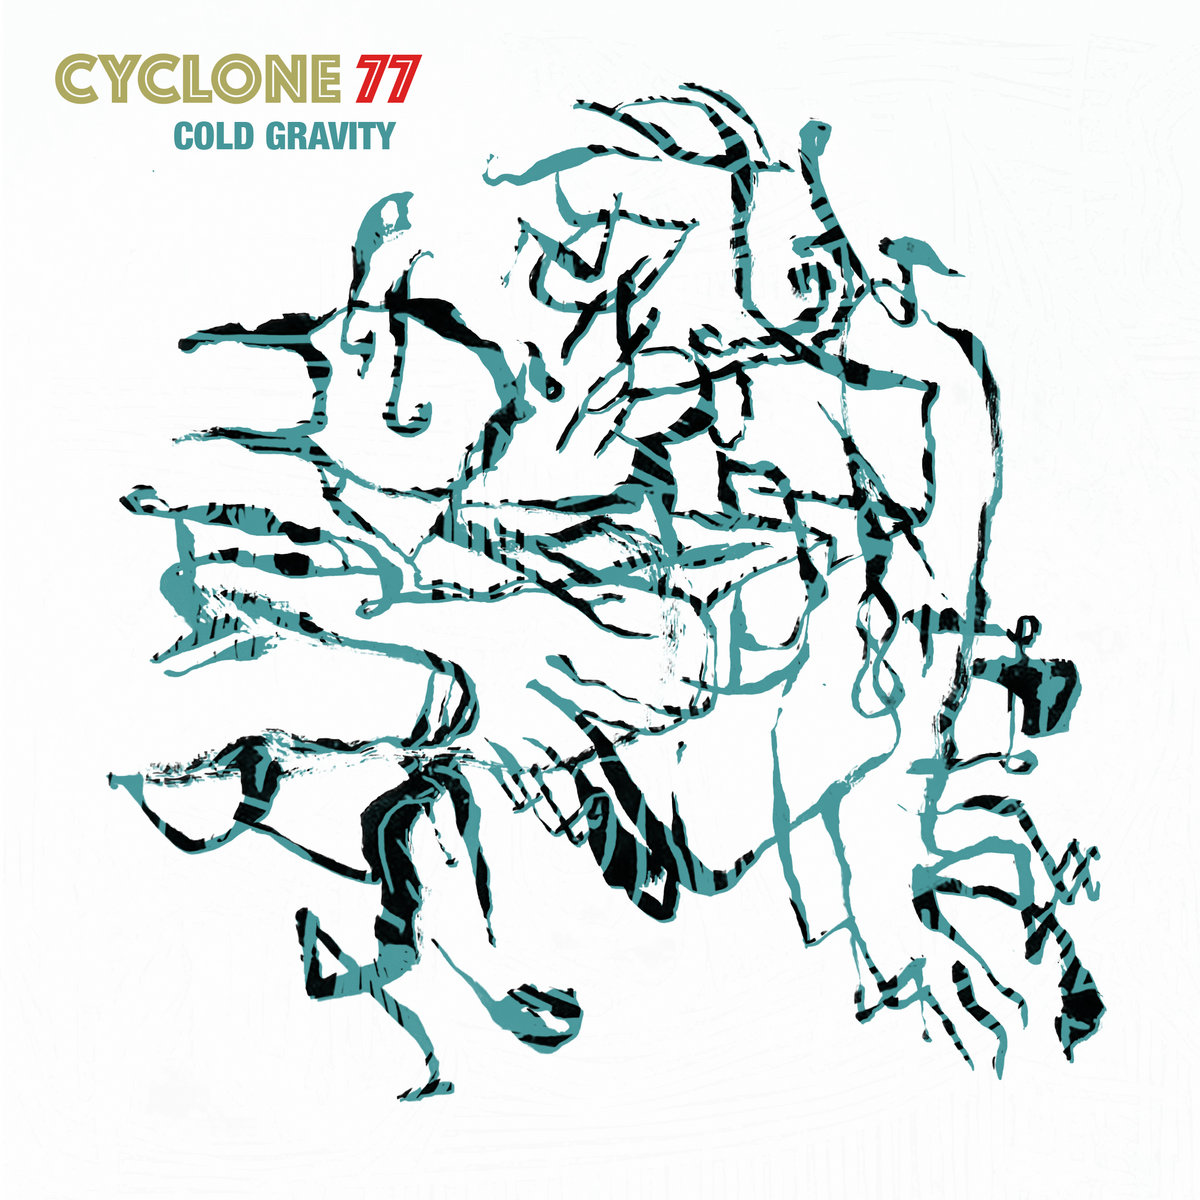 Cyclone 77 - Cold Gravity